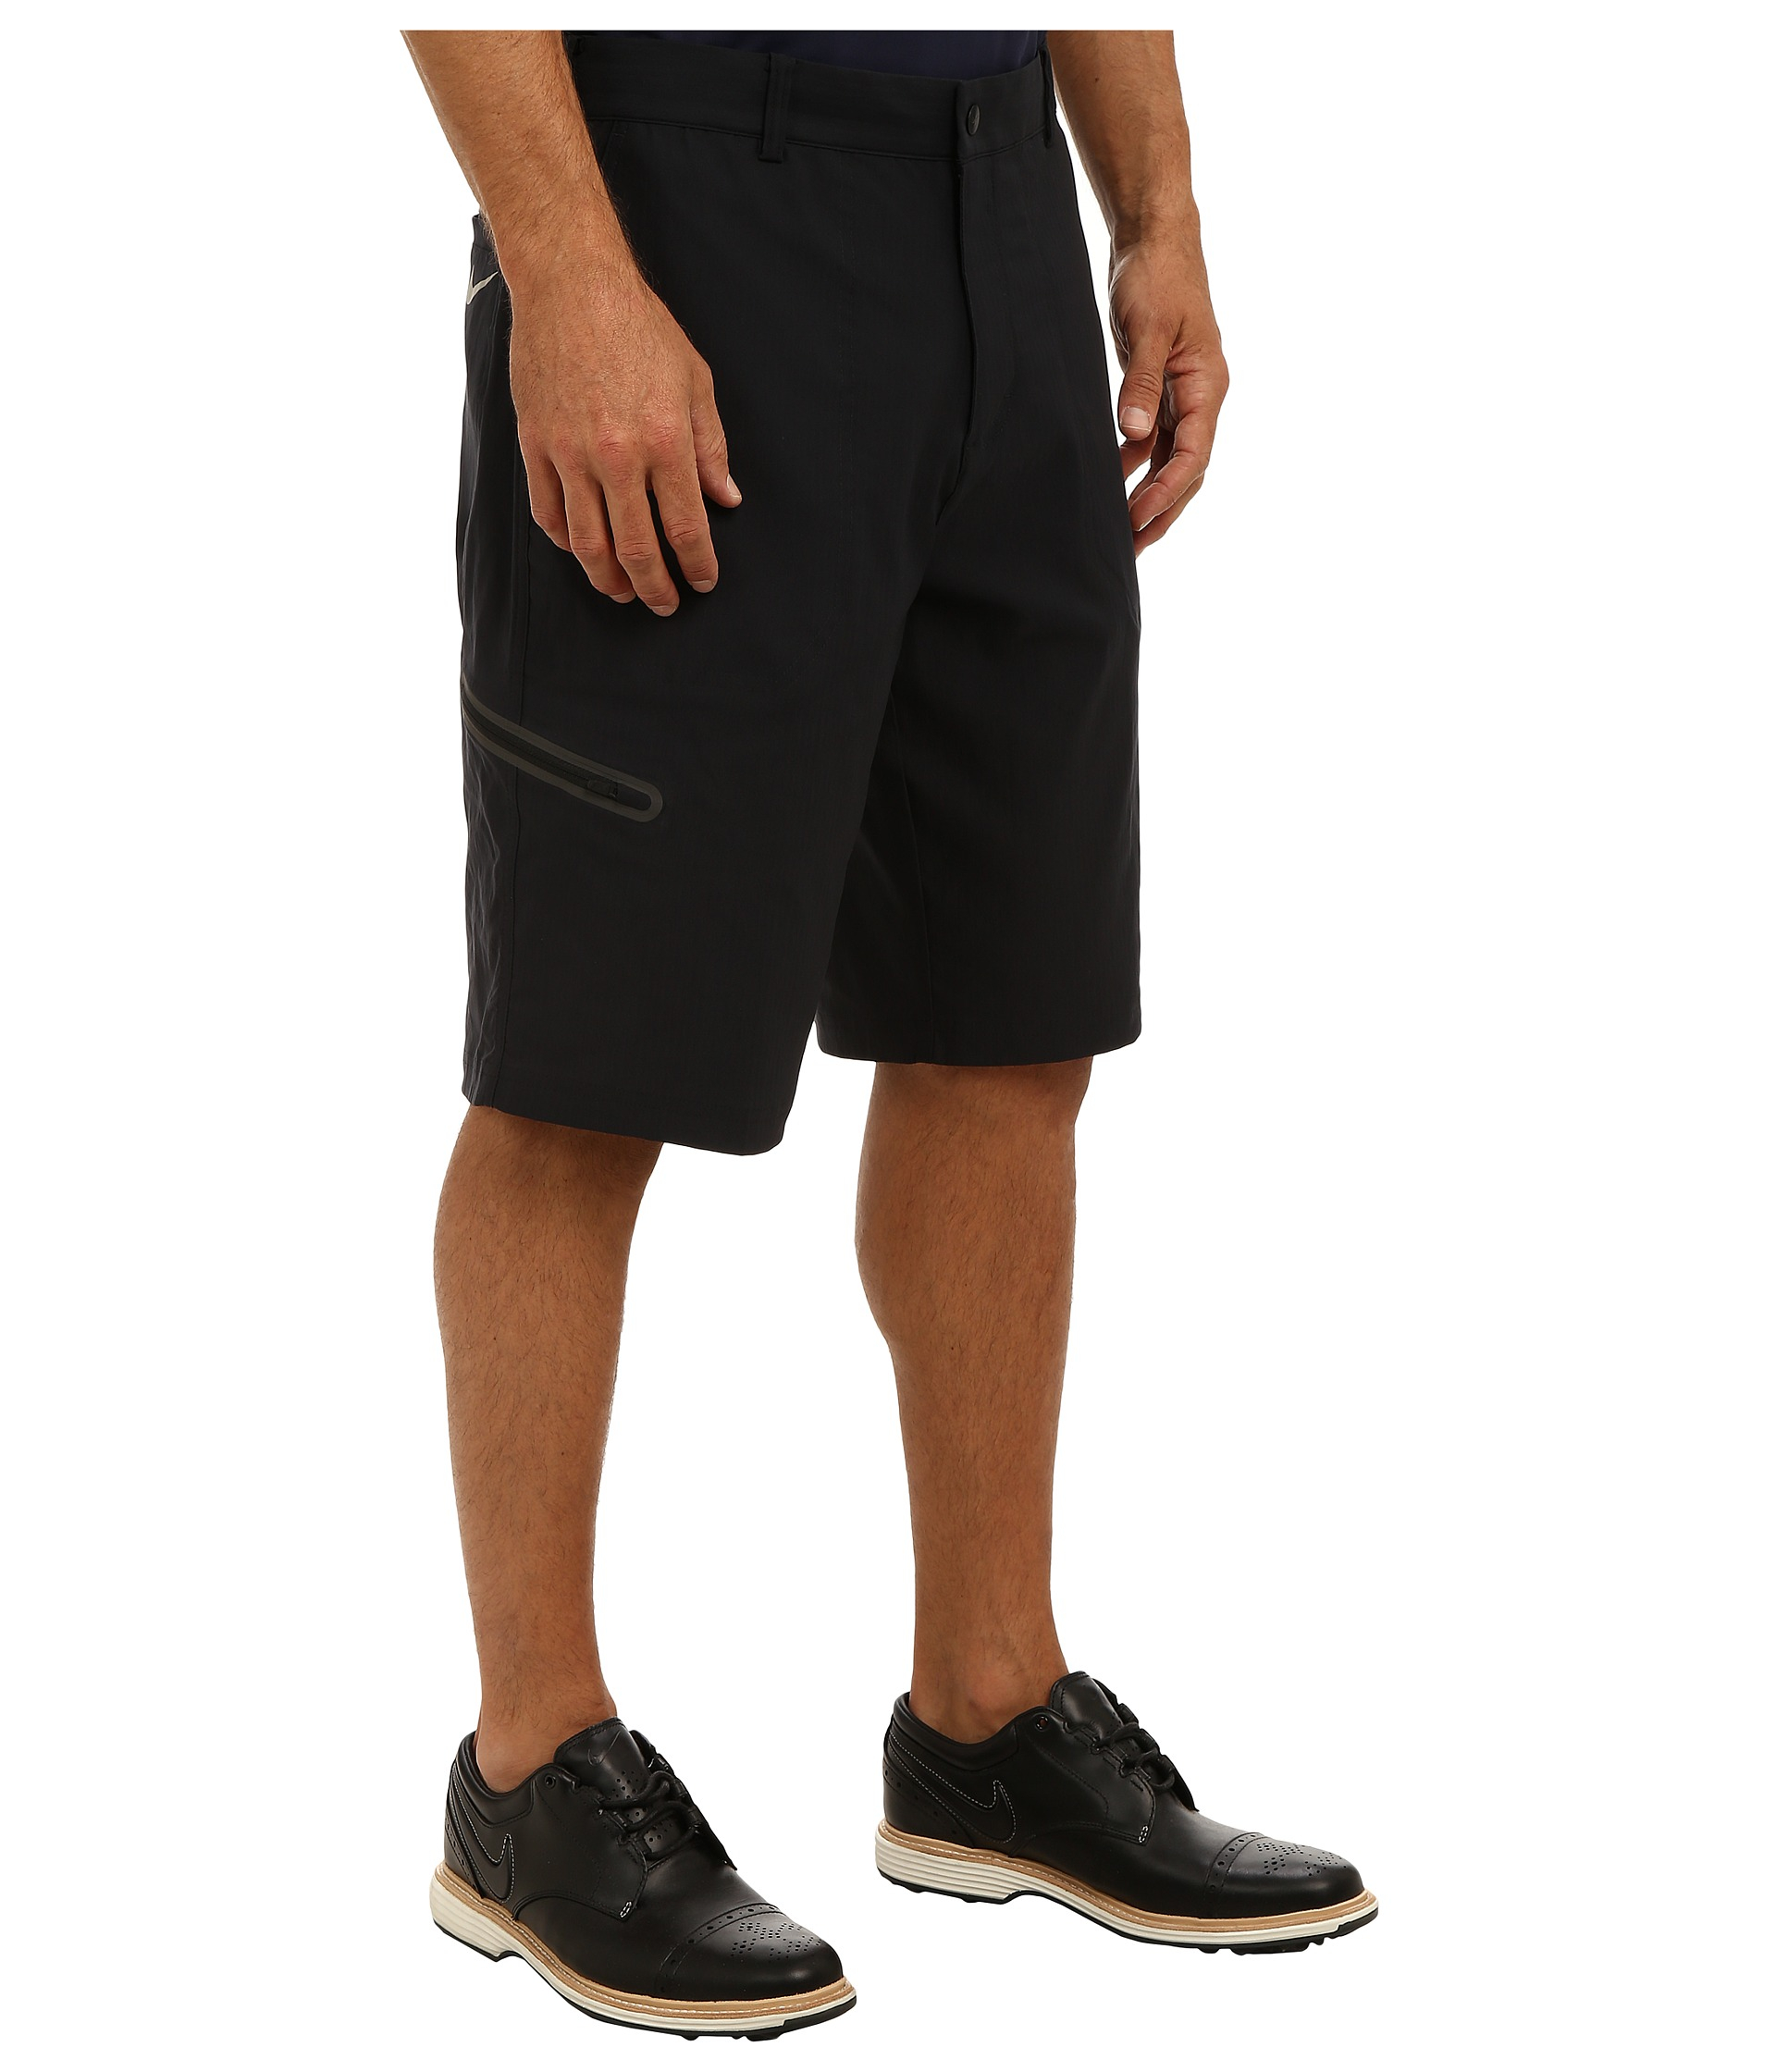 tiger woods practice shorts cheap online